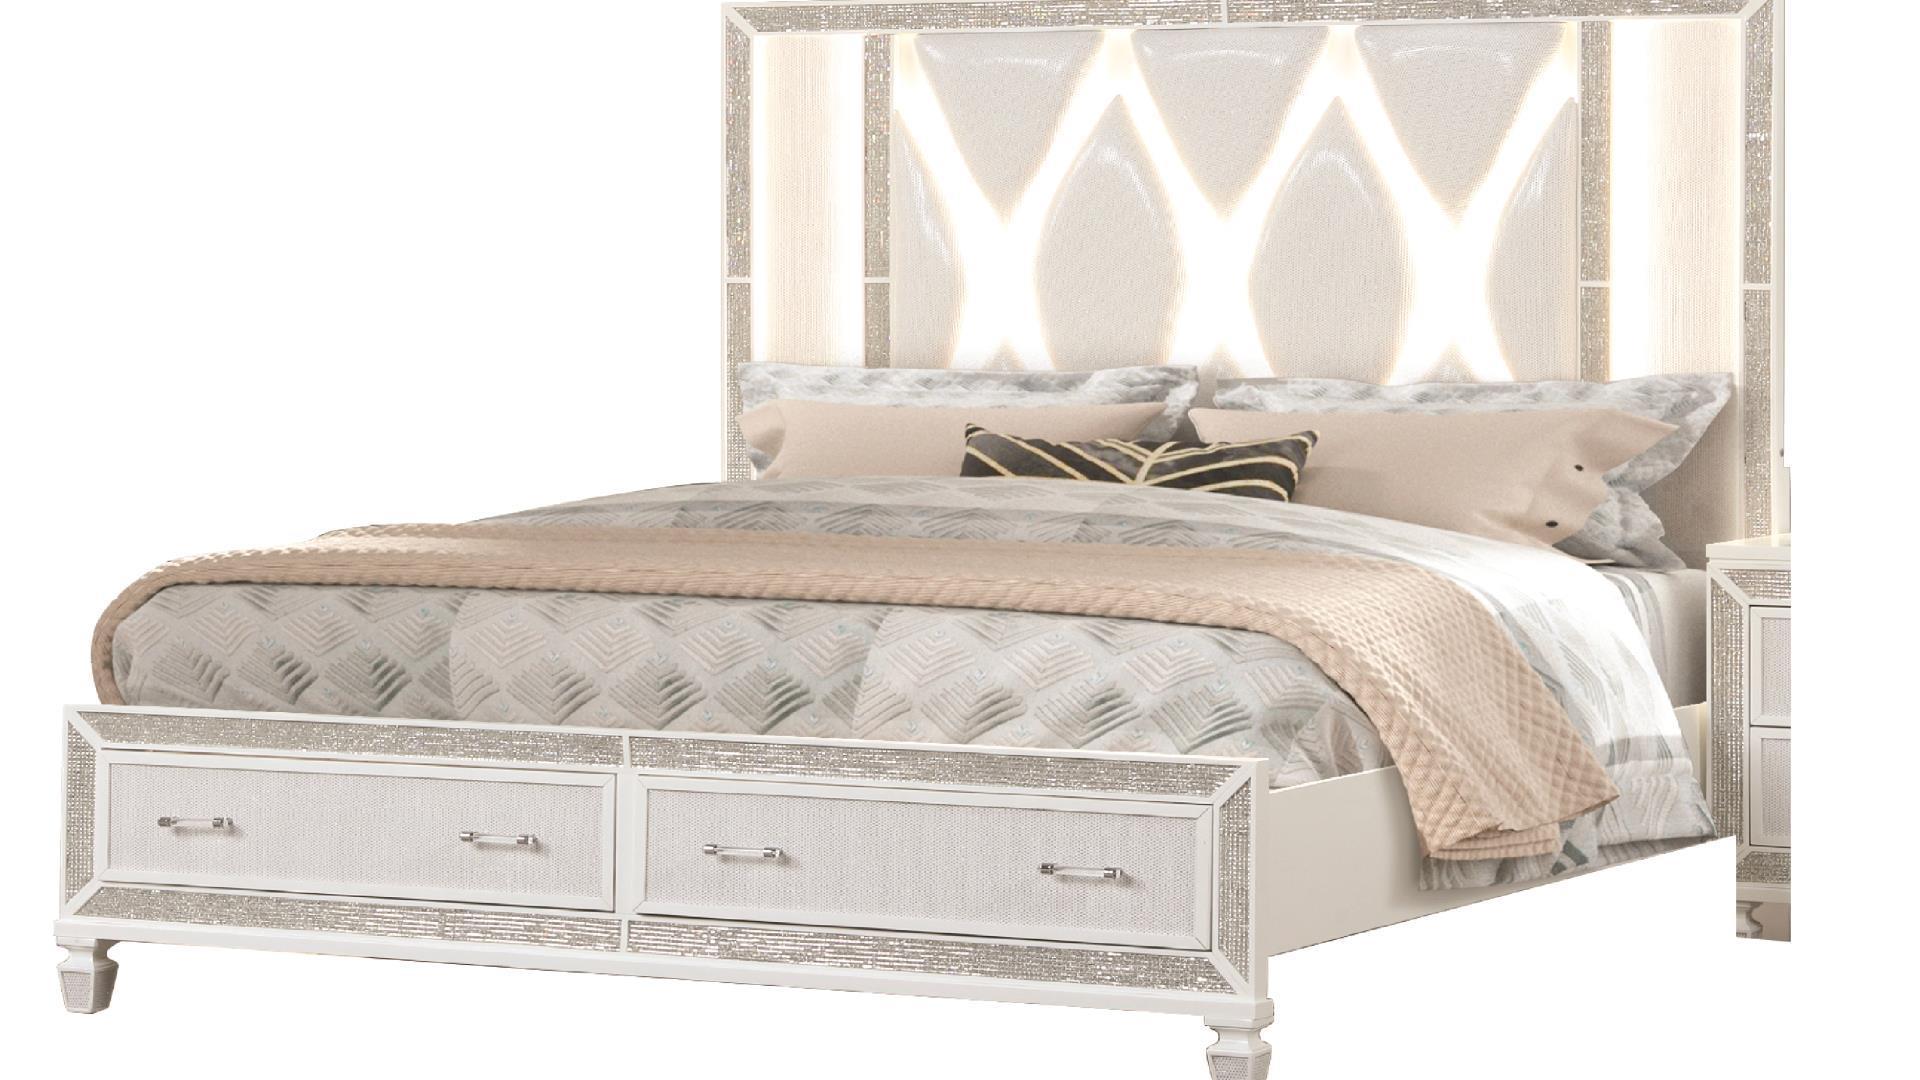 

    
Glam White Solid Wood King Bed Set 4Pcs CRYSTAL Galaxy Home Modern Contemporary
